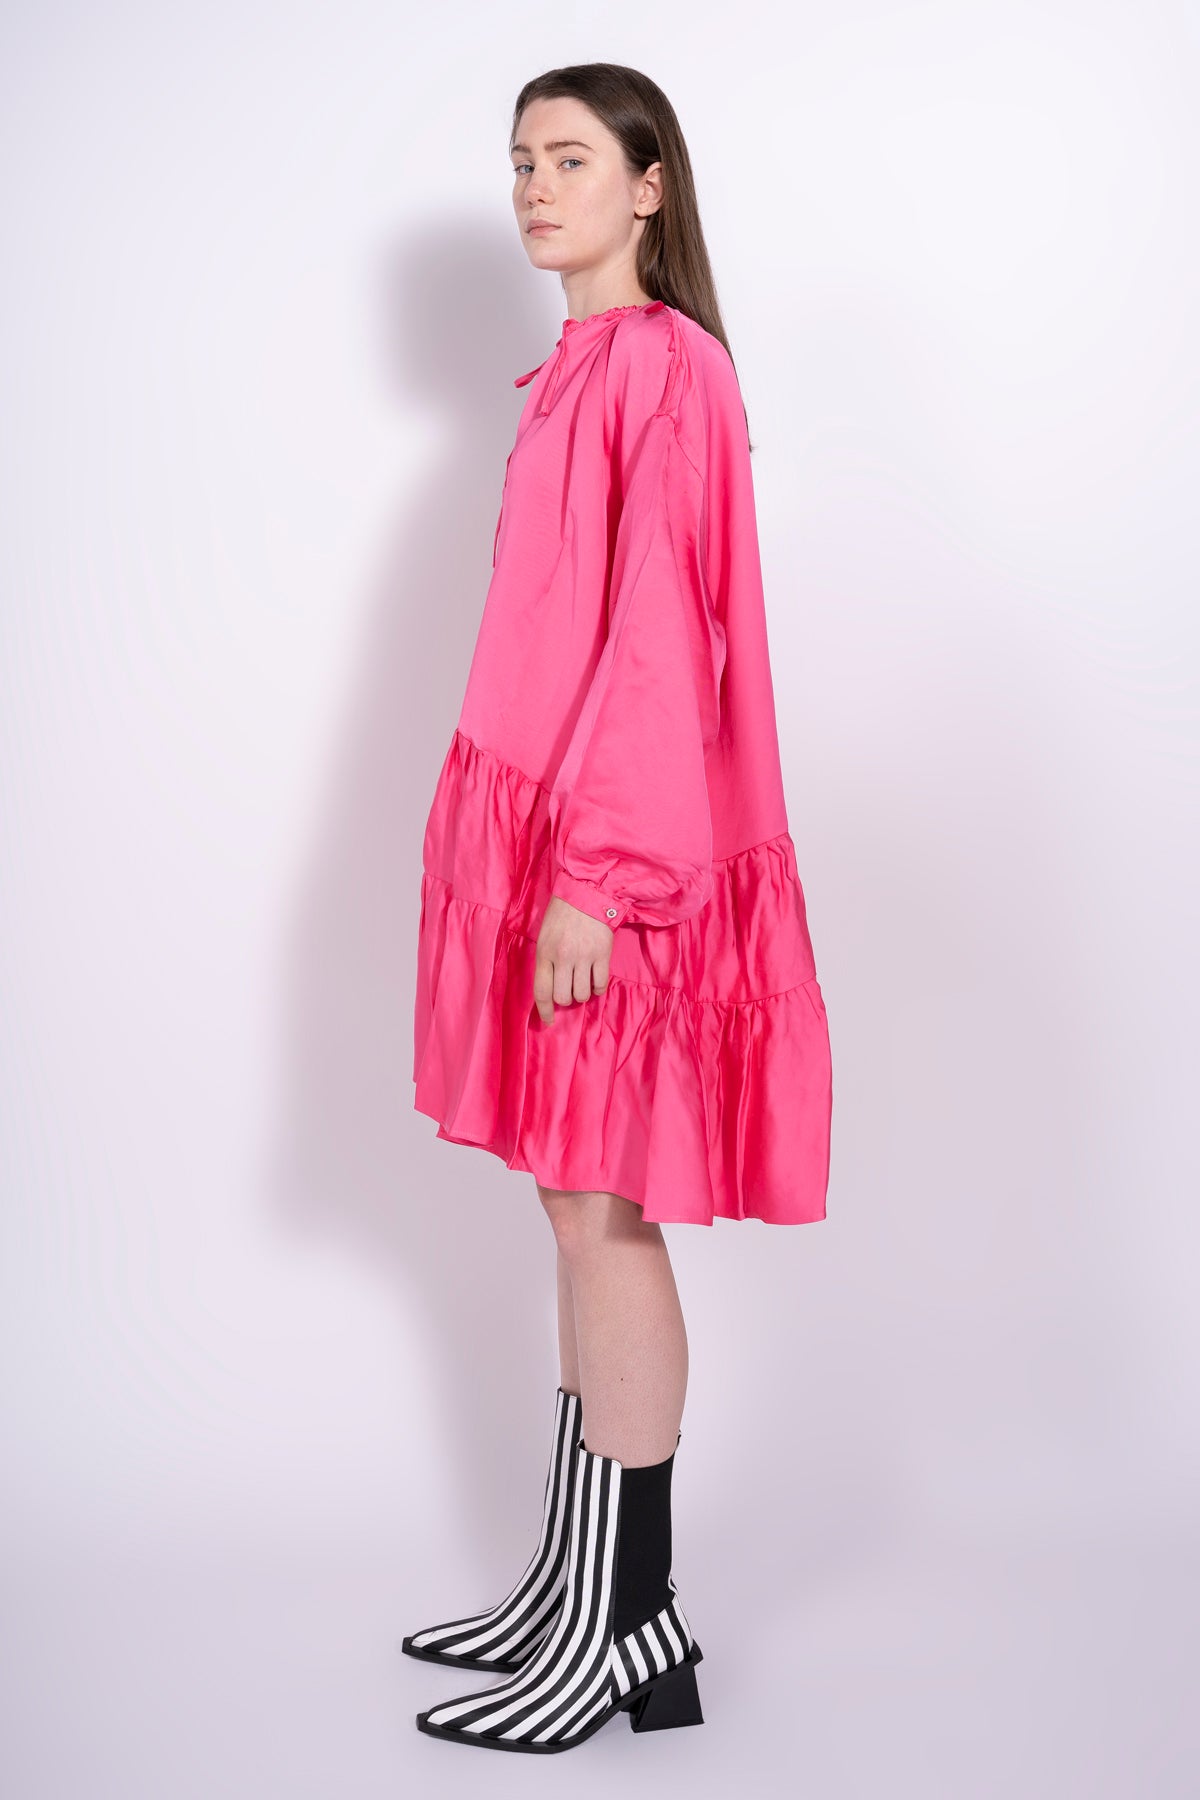 BRIGHT PINK OVERSIZED TIERED GATHERED DRESS MARQUES ALMEIDA